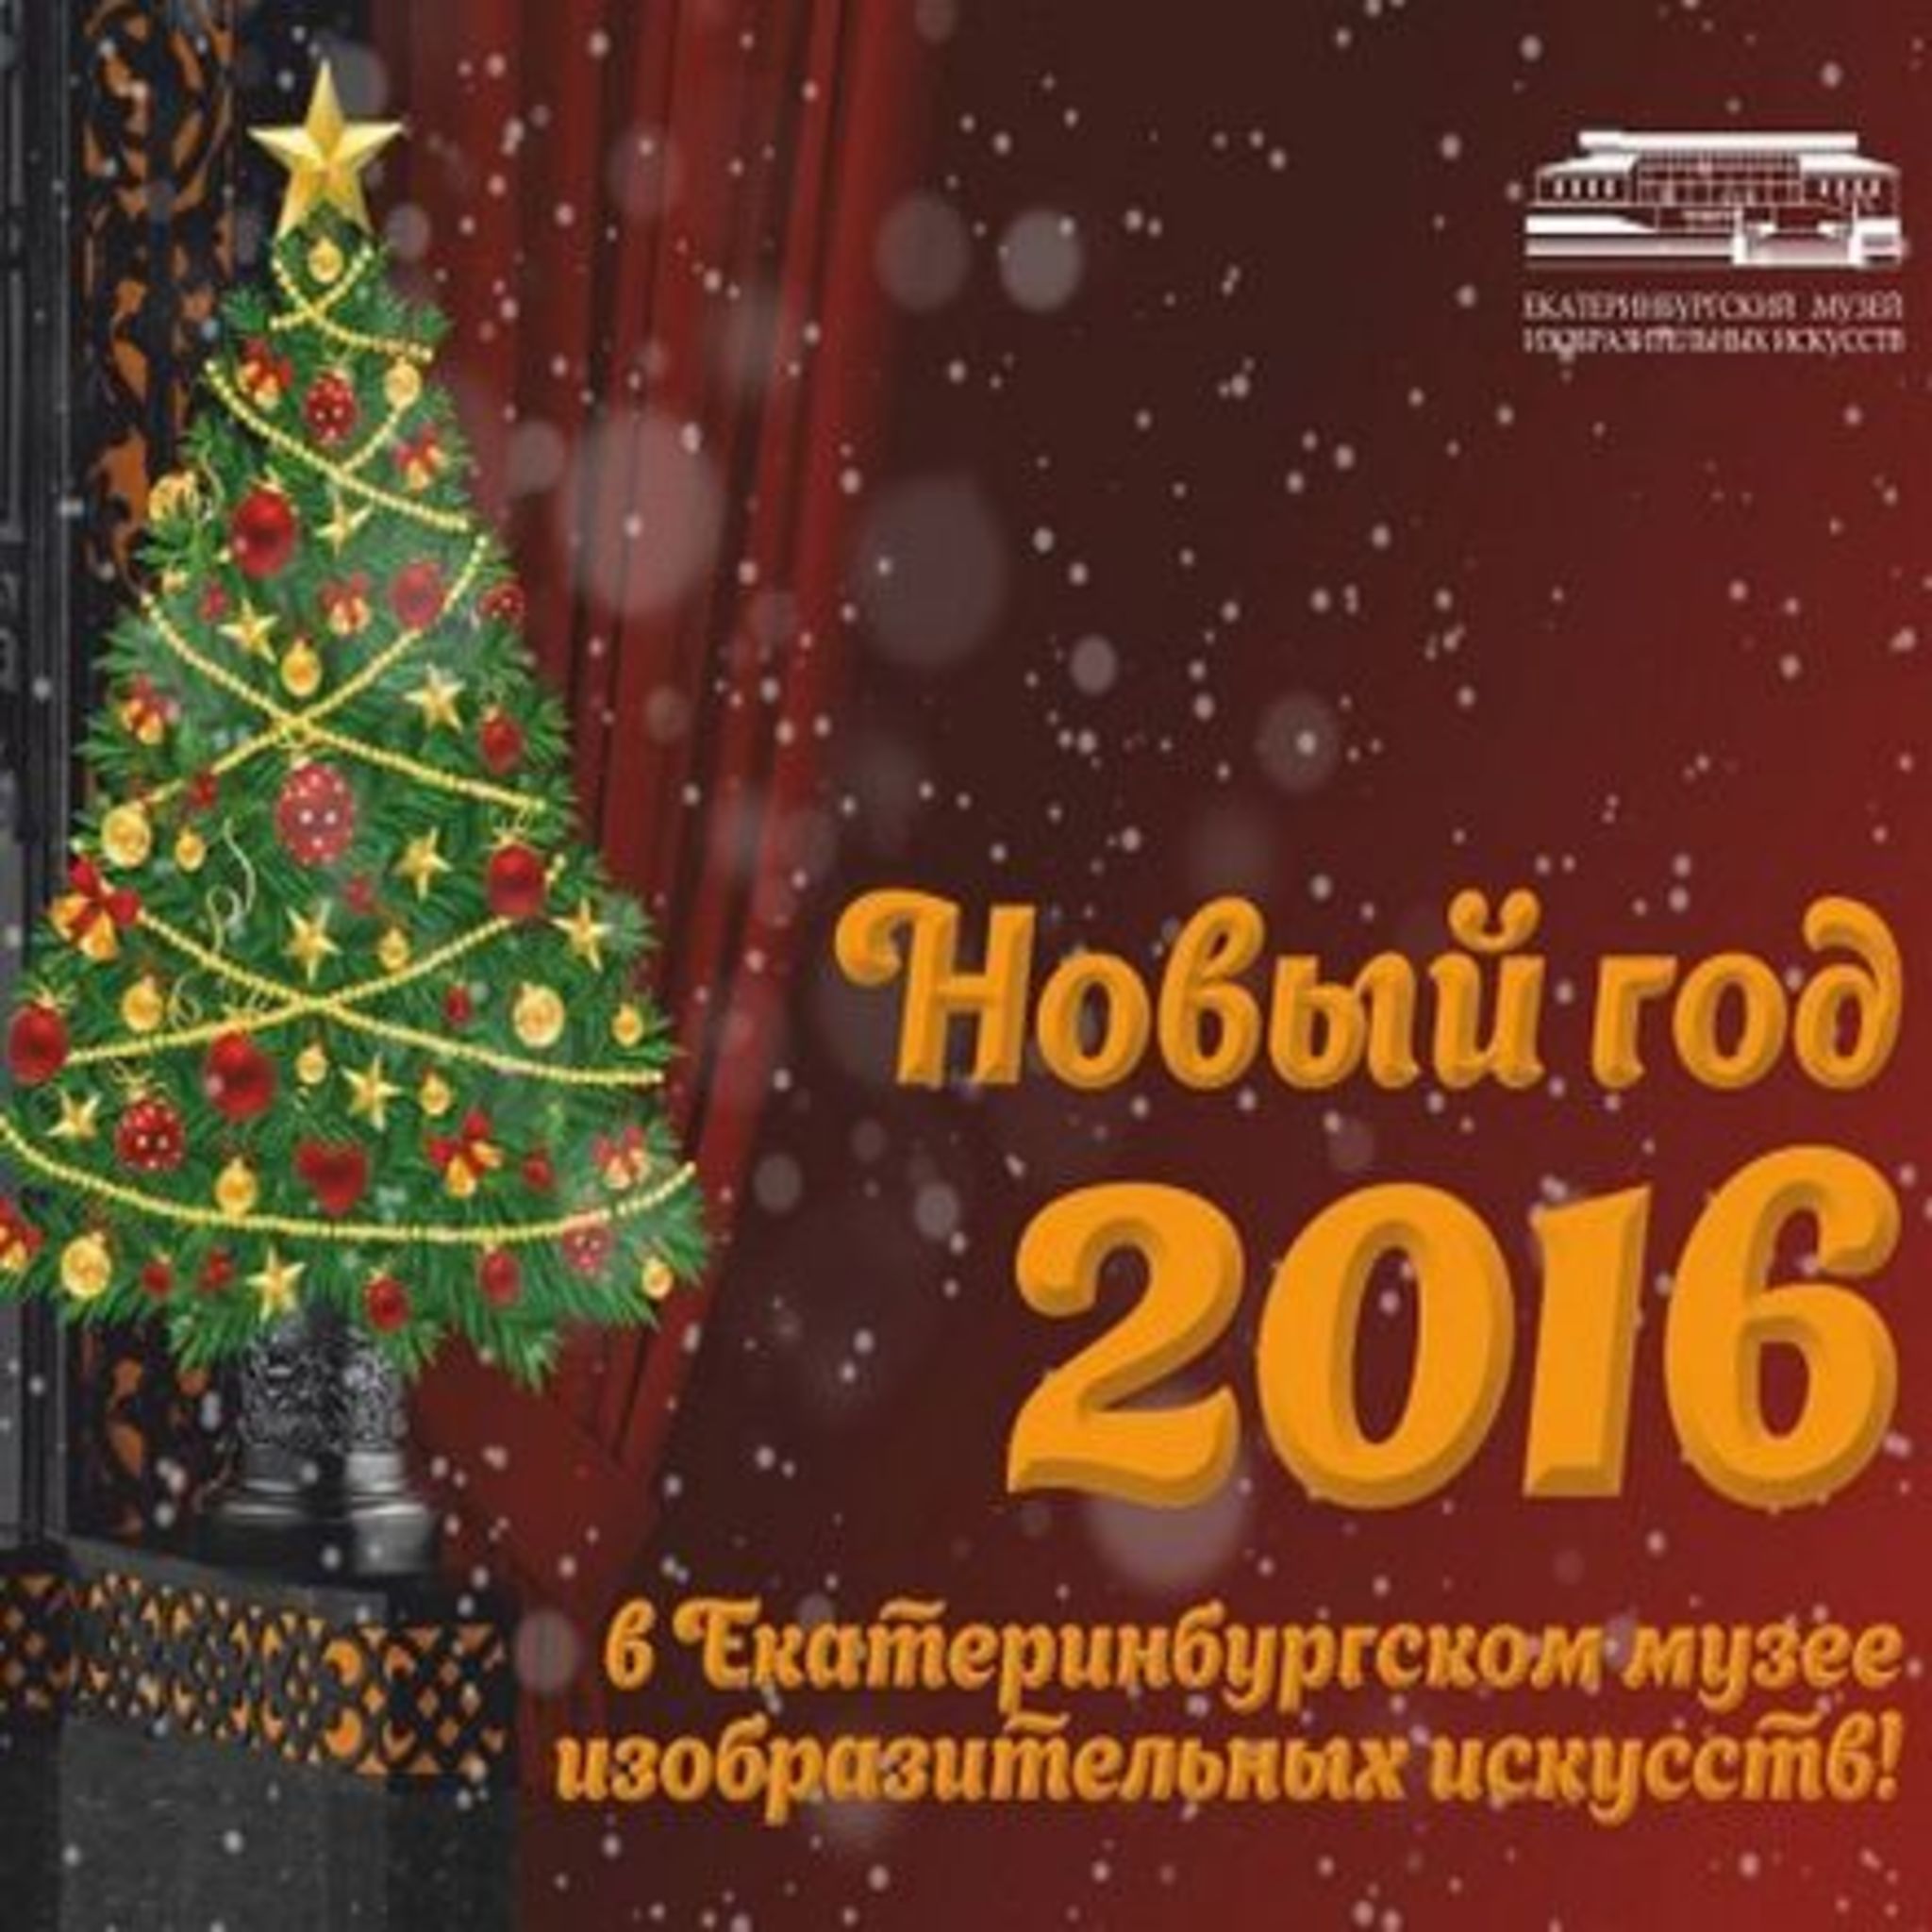 New Year’s Eve 2016 at the Yekaterinburg Museum of Fine Arts